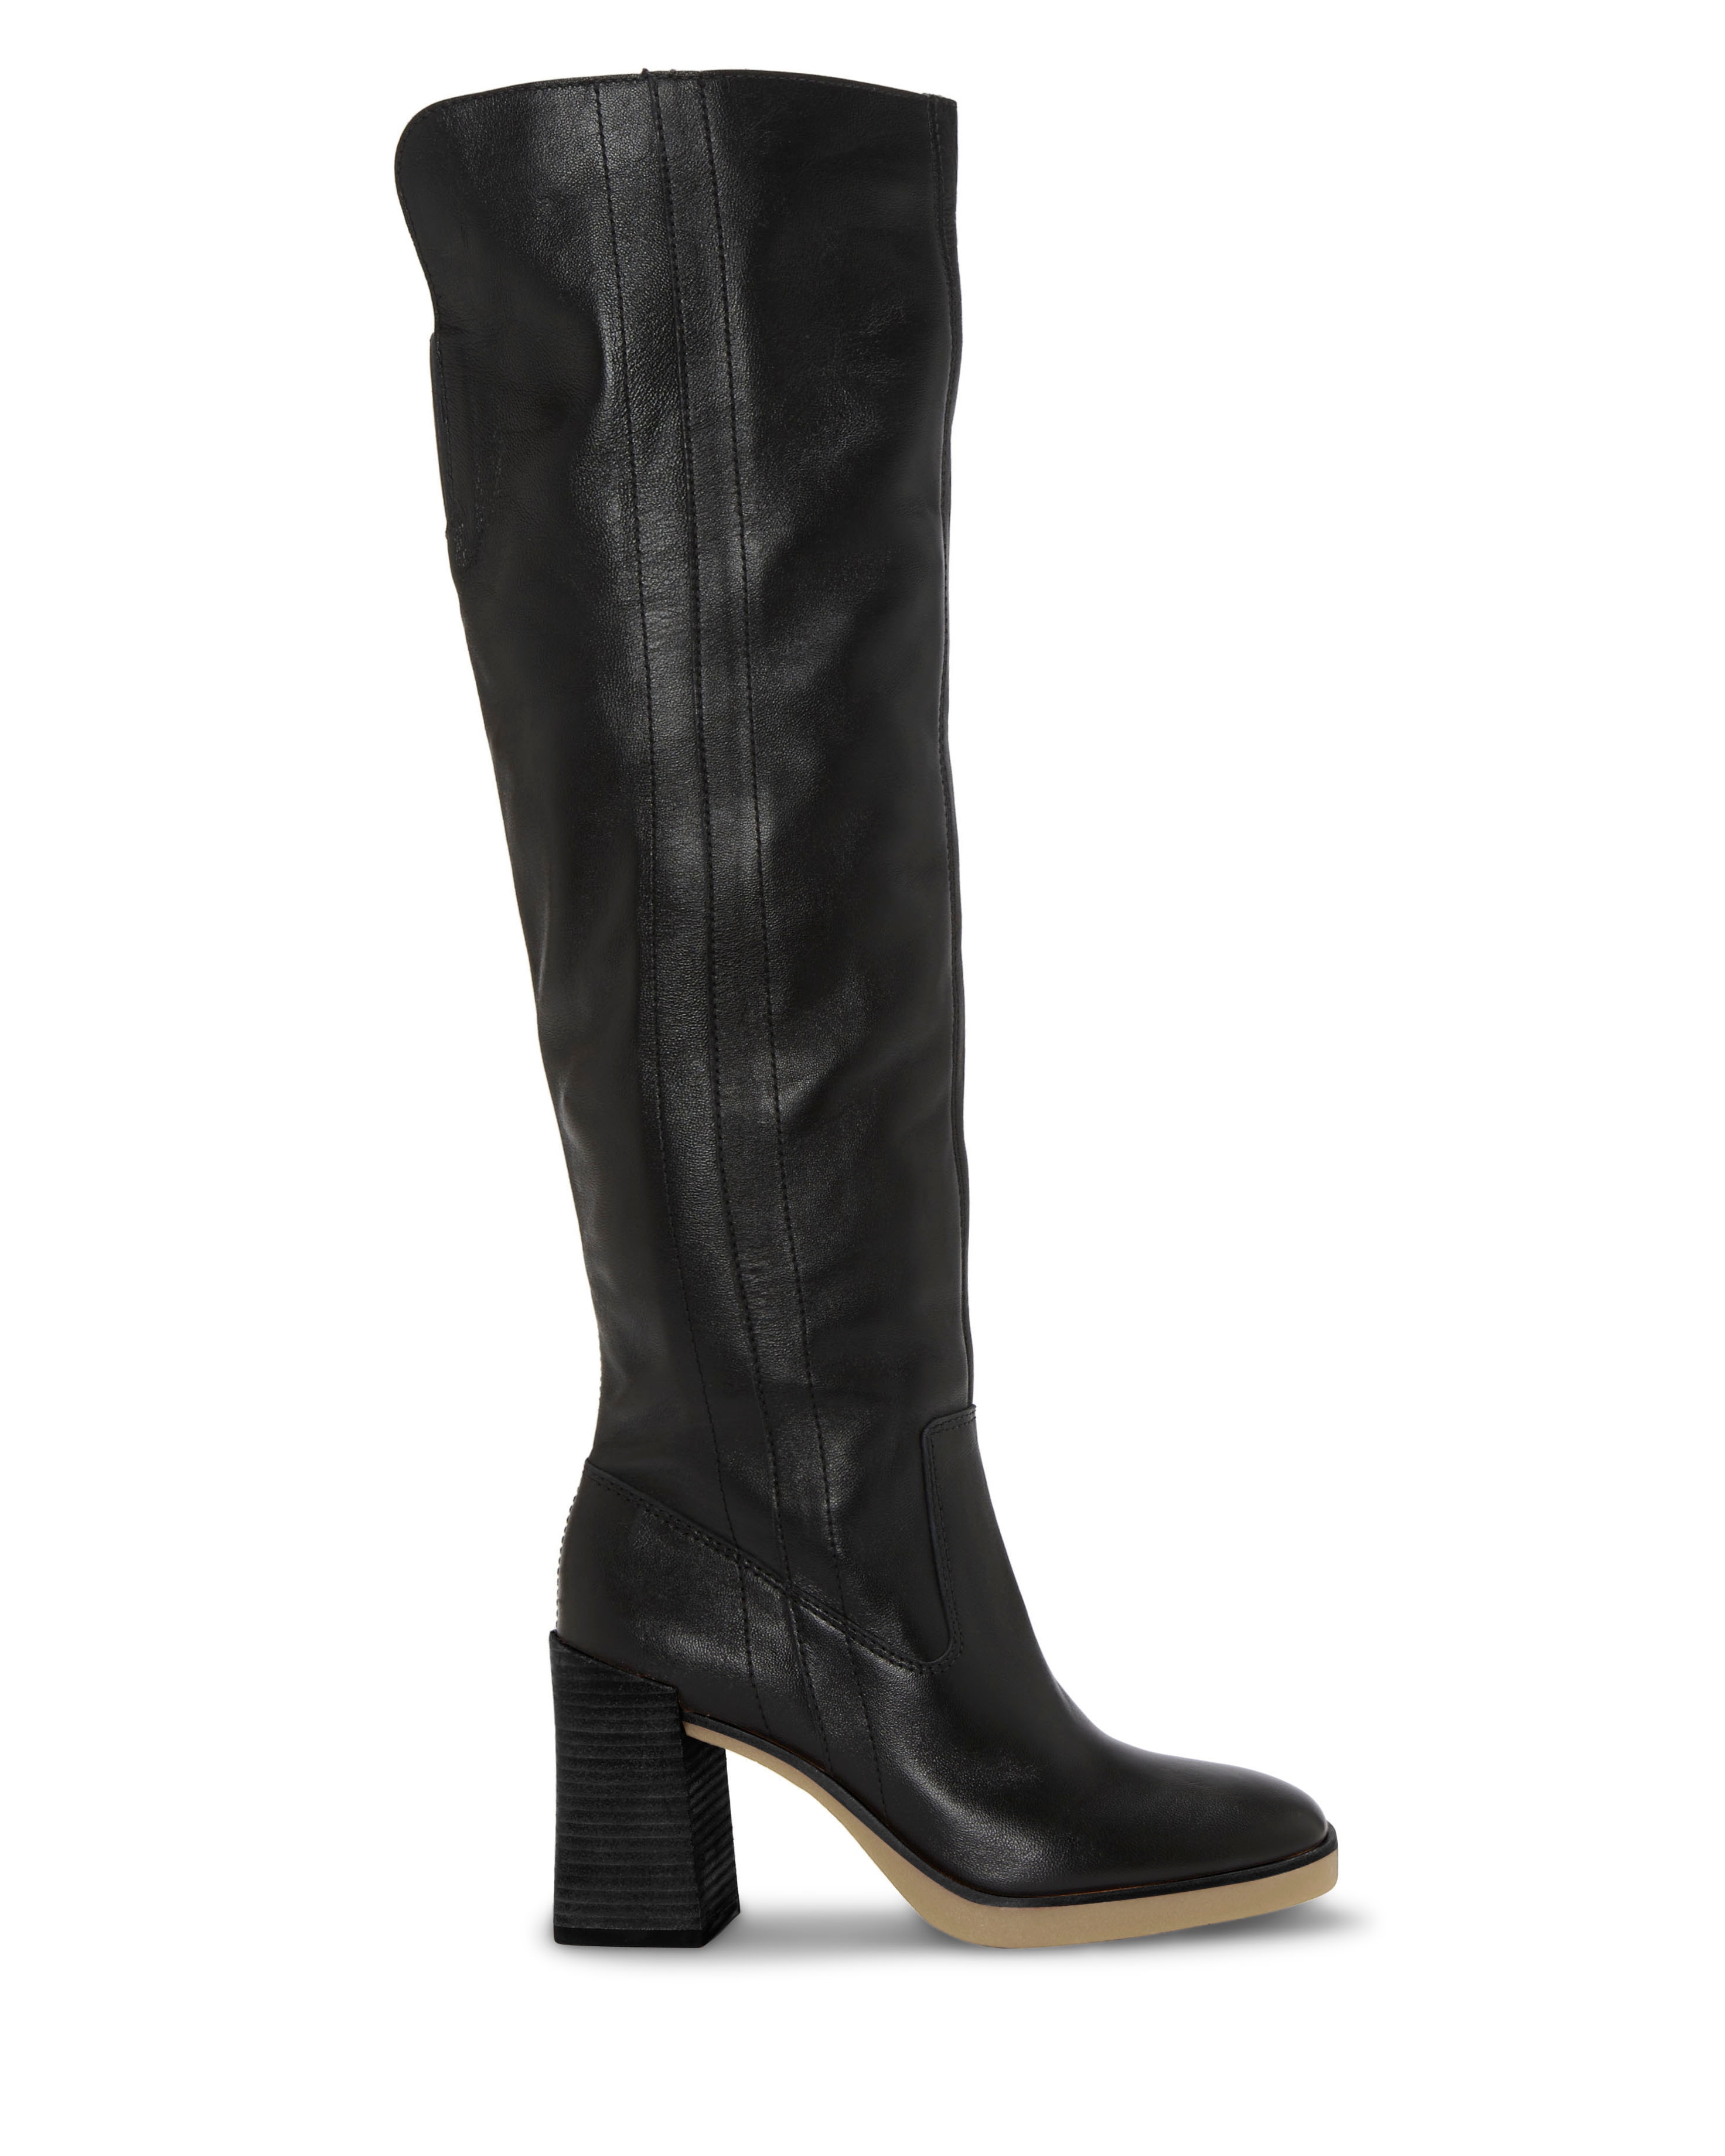 Vince Camuto Eyana Wide-Calf Over The Knee Boot